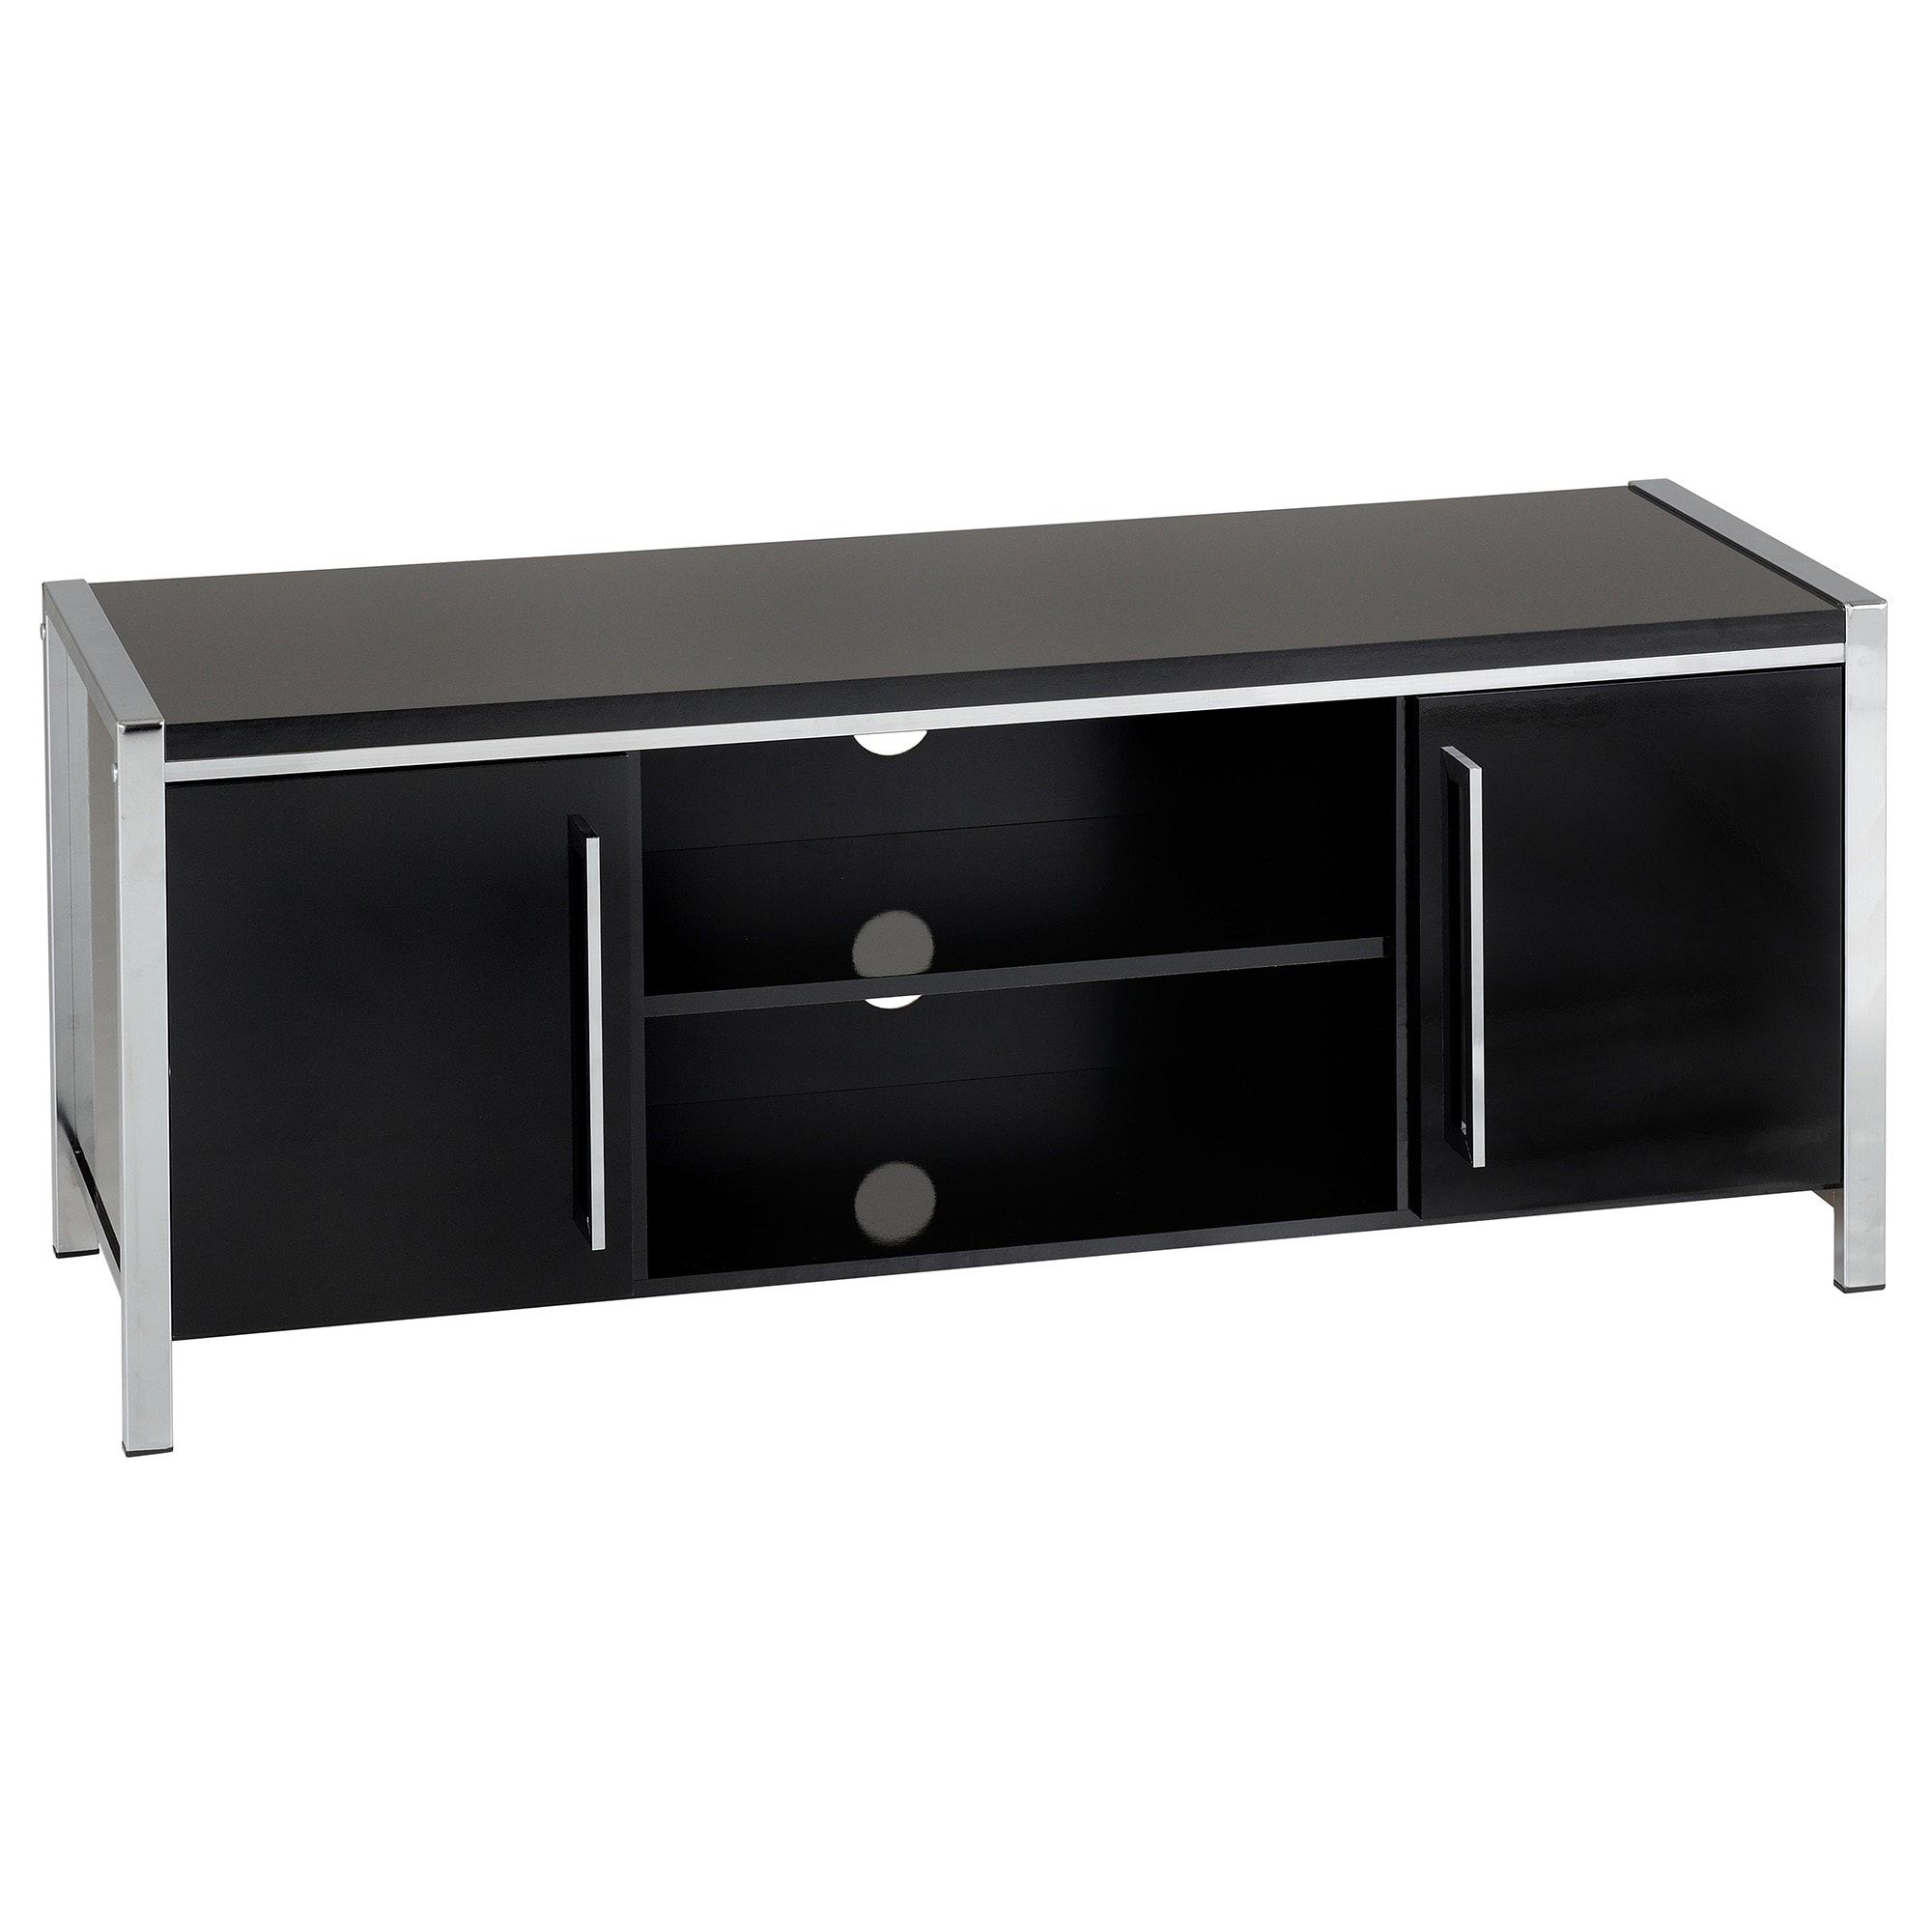 Charisma 2 Door Tv Unit | Modern Furniture | Tv Units Throughout Charisma Tv Stands (View 10 of 15)